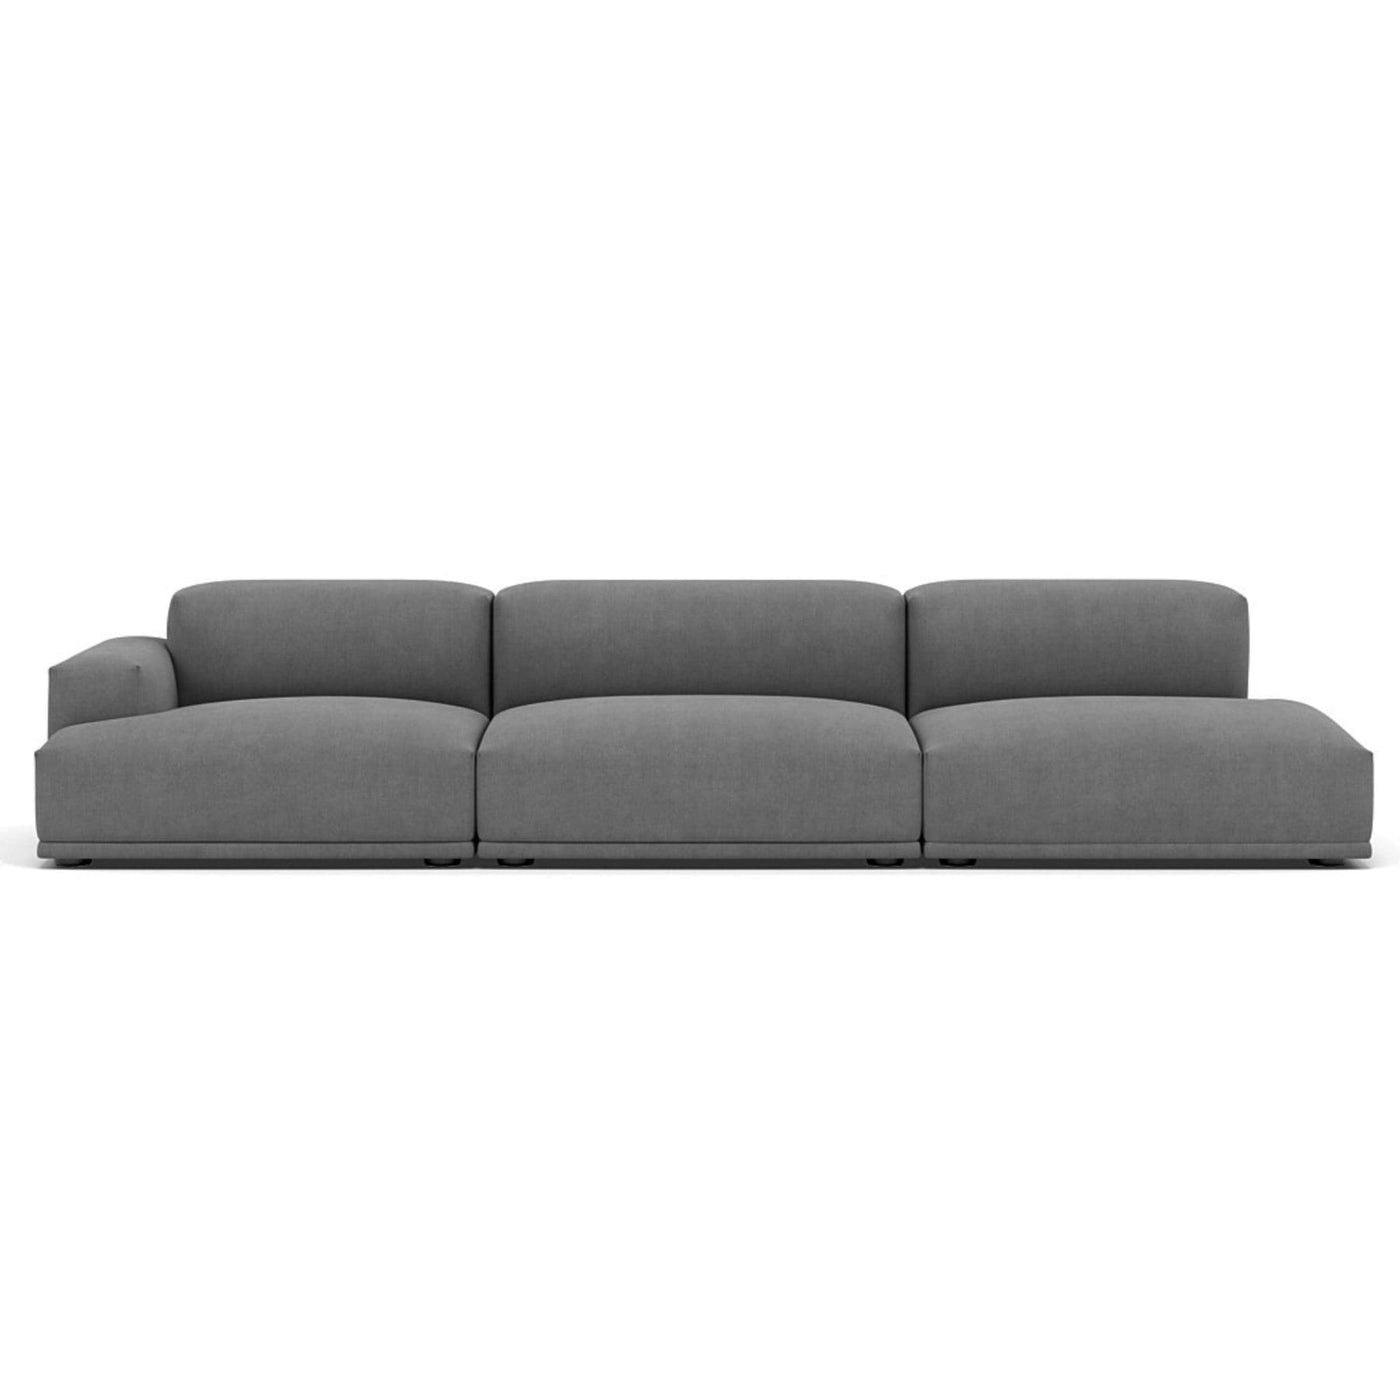 Muuto Connect modular sofa 3 seater in configuration 2. Made to order from someday designs. #colour_fiord-171